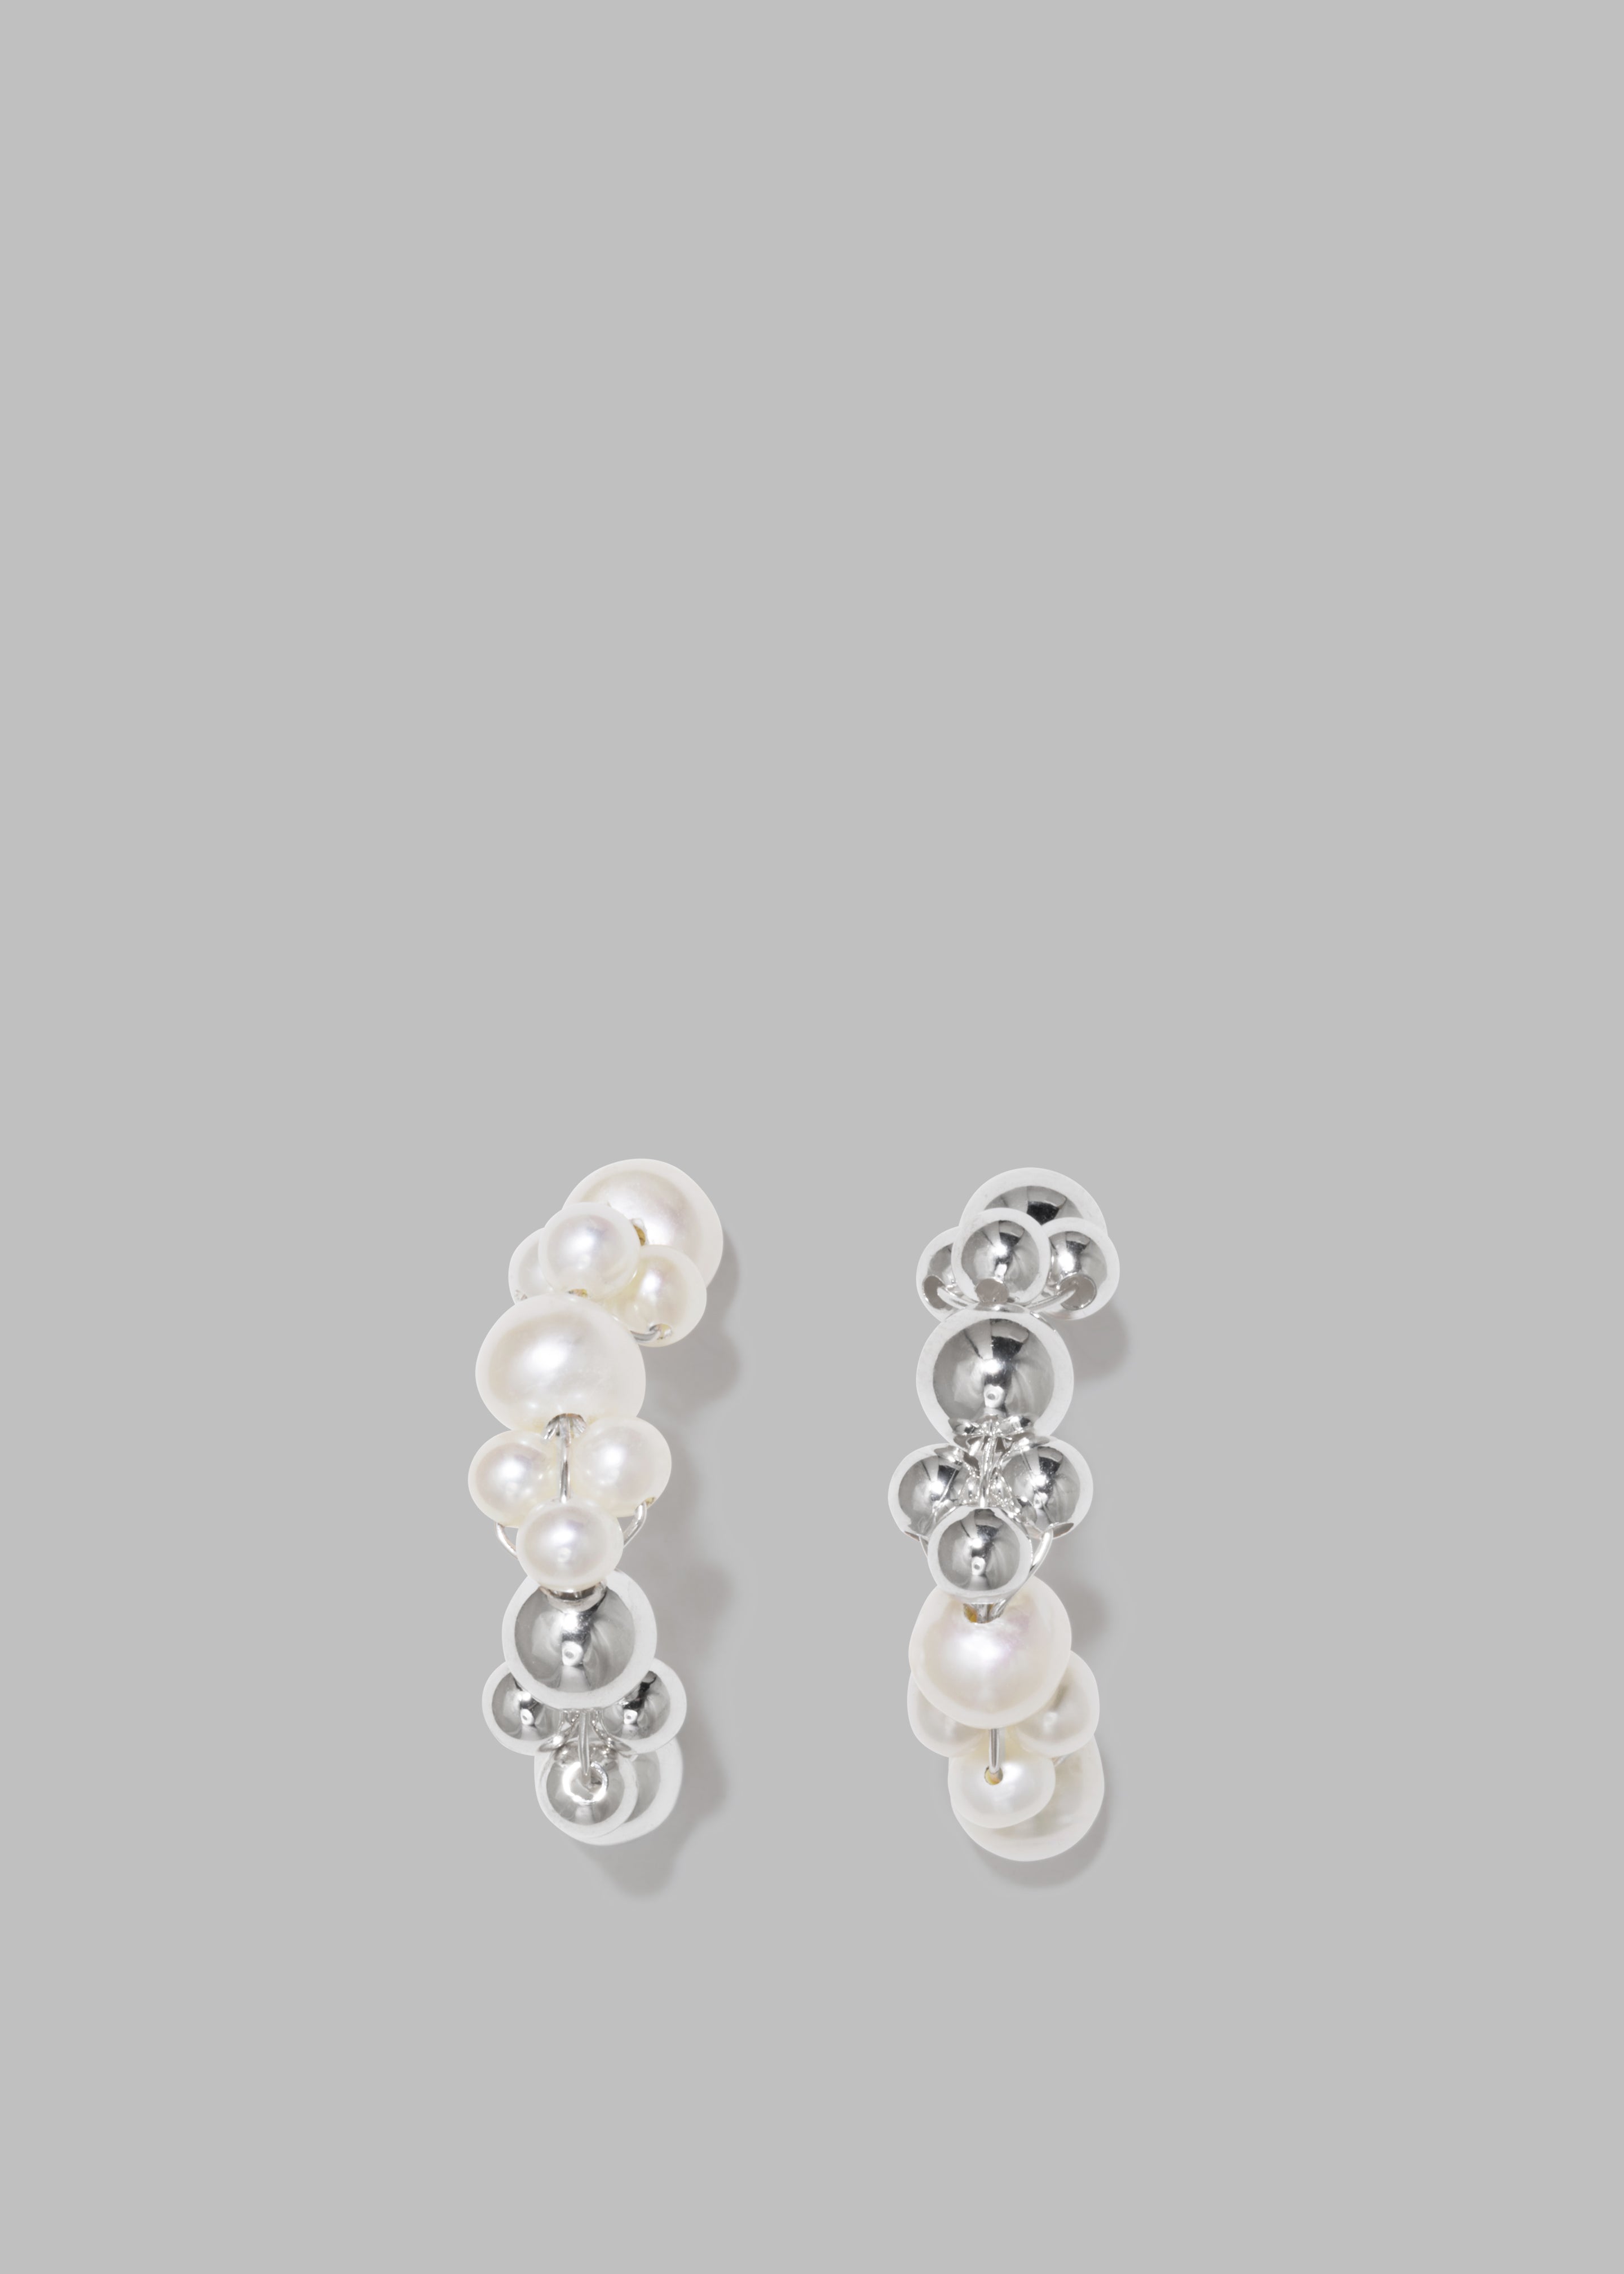 Completedworks Every Cloud Has A Silver Lining Earrings - Pearl/Sterling Silver - 5